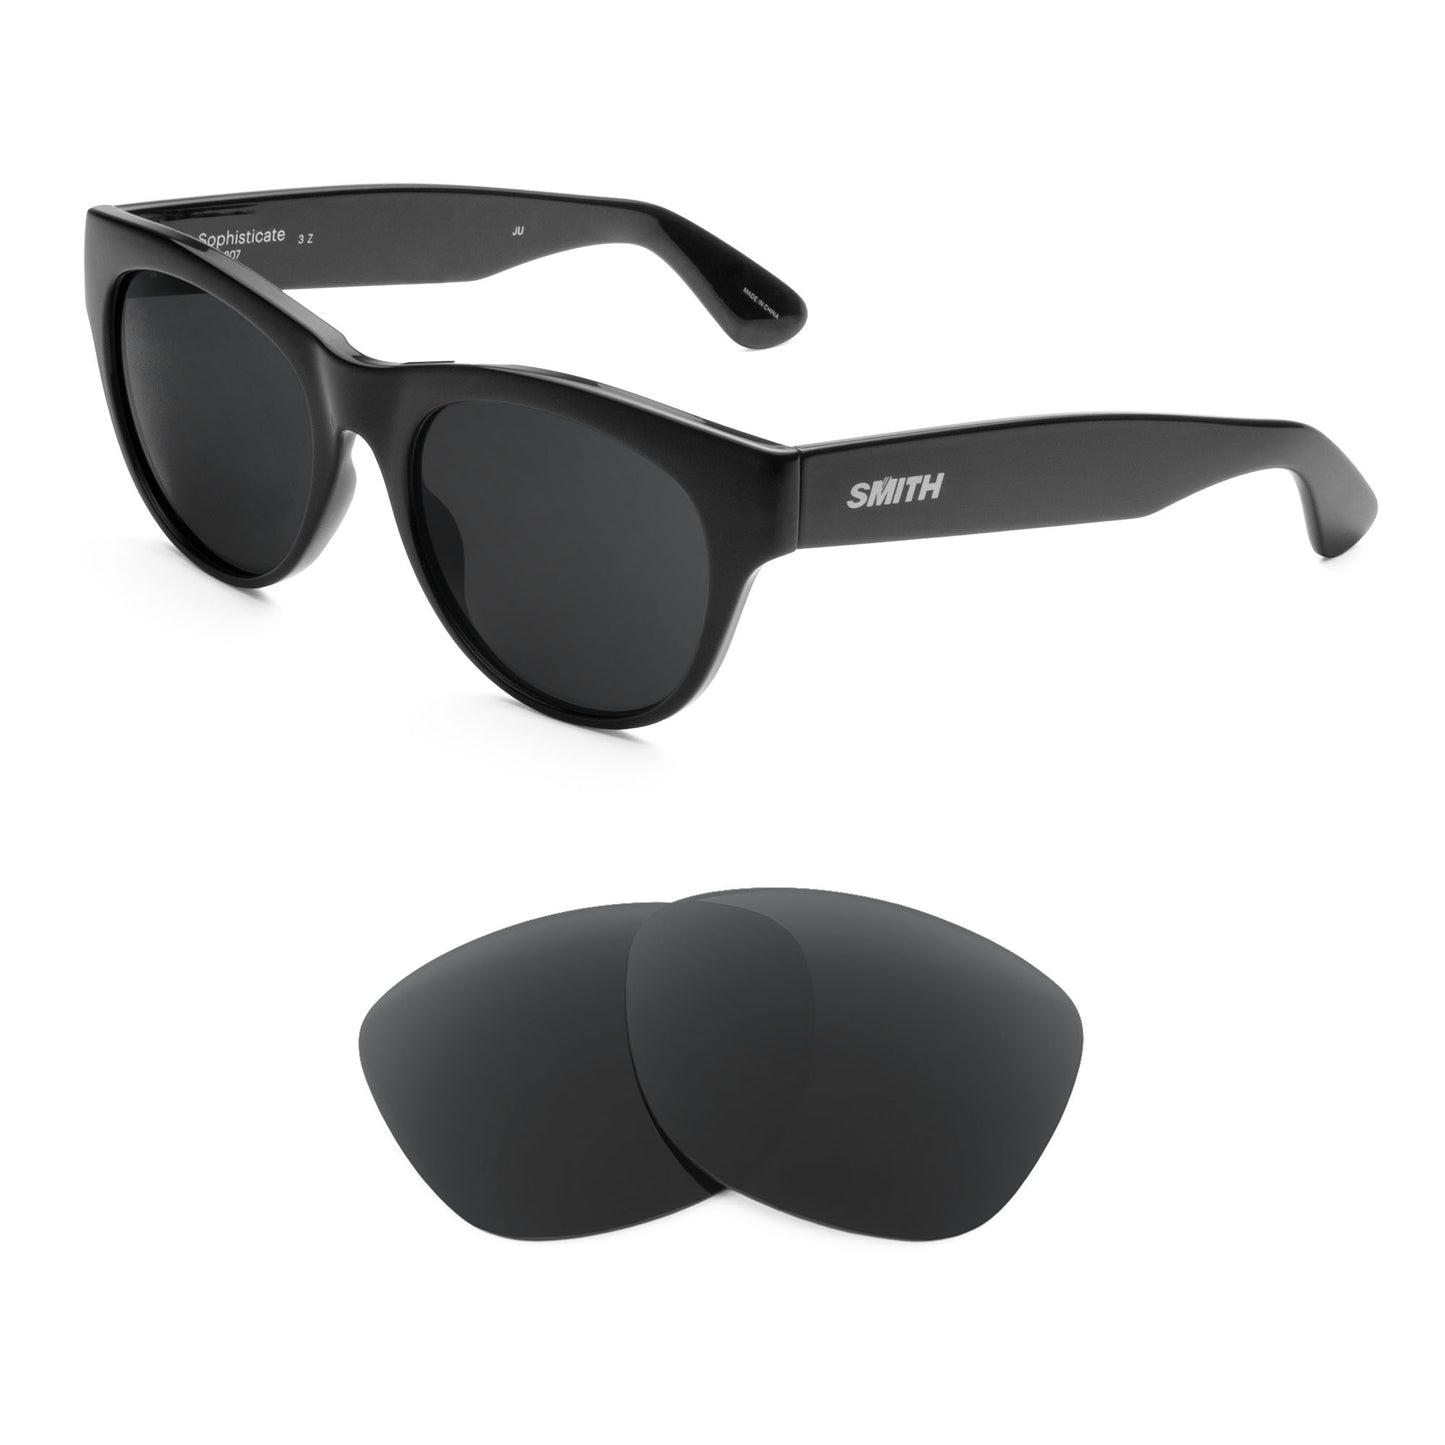 Smith Sophisticate sunglasses with replacement lenses